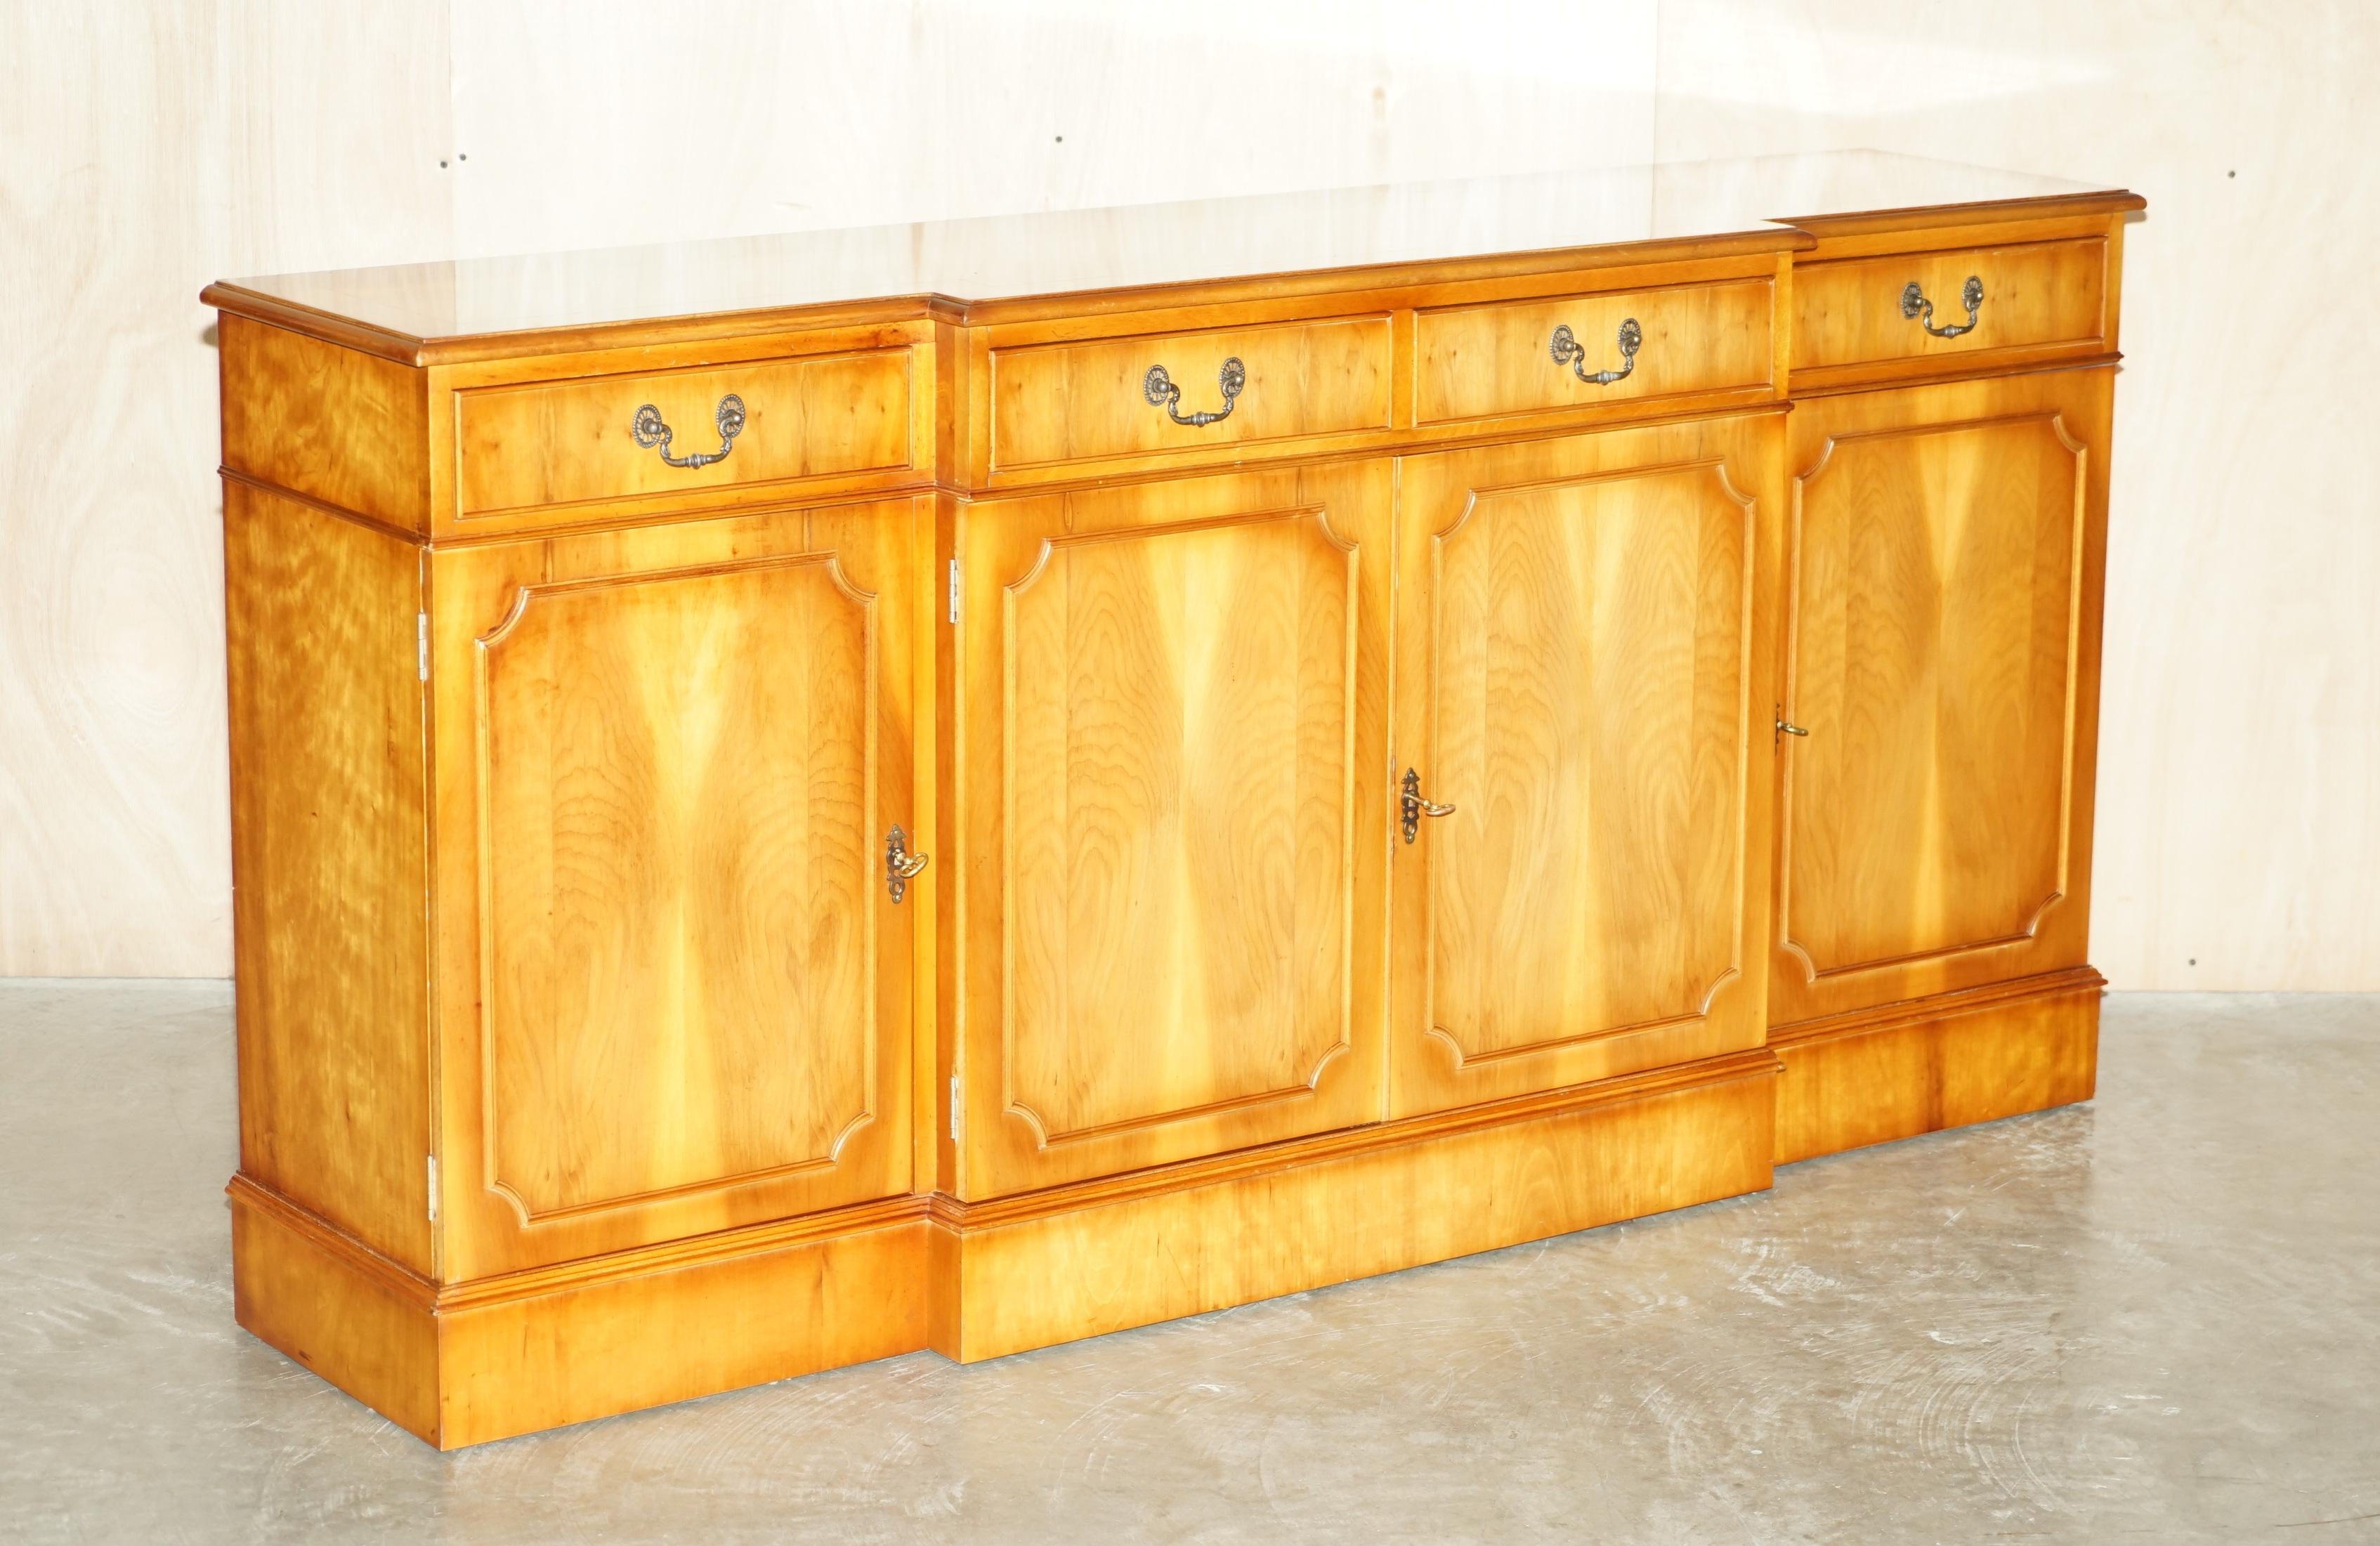 We are delighted to offer for sale this lovely burr yew wood four cupboard and drawer sideboard with original key

A very good looking and well made piece. This is very utilitarian with large sized sideboard with drawers, the breakfront really